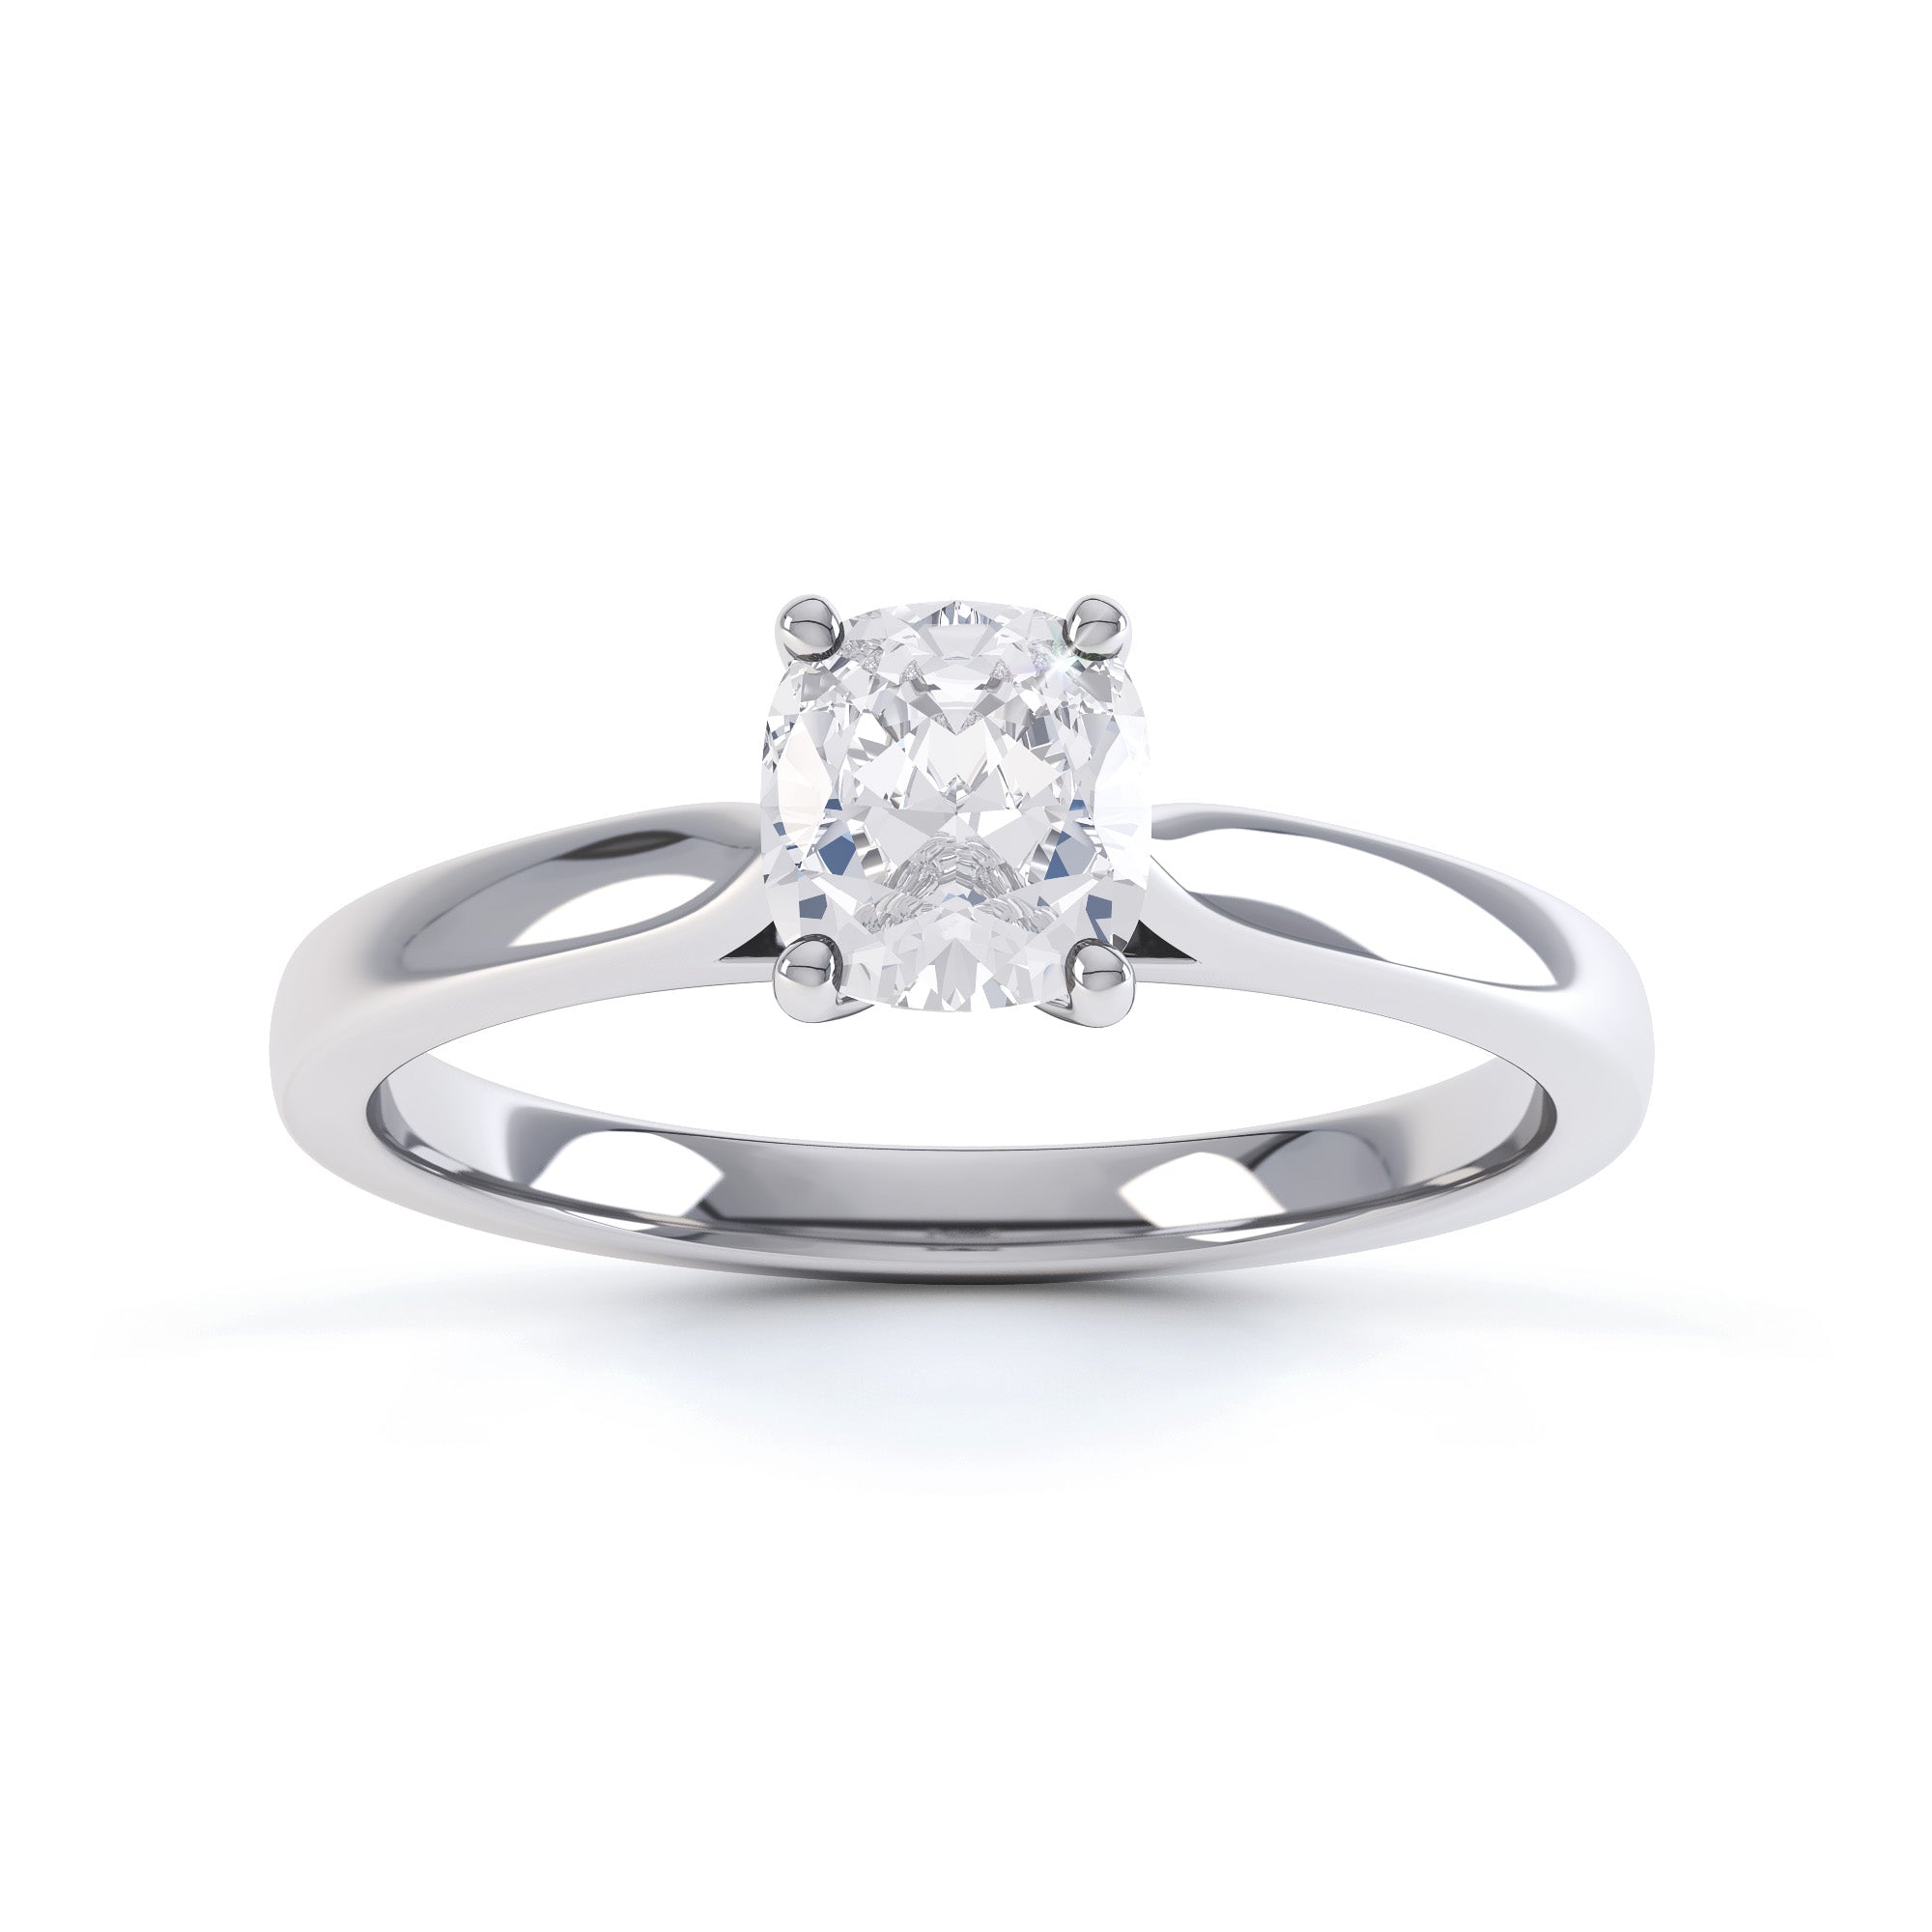 Cushion Cut Centre Stone, 4 claw, Diamond Engagement Ring with Tapered Shoulders